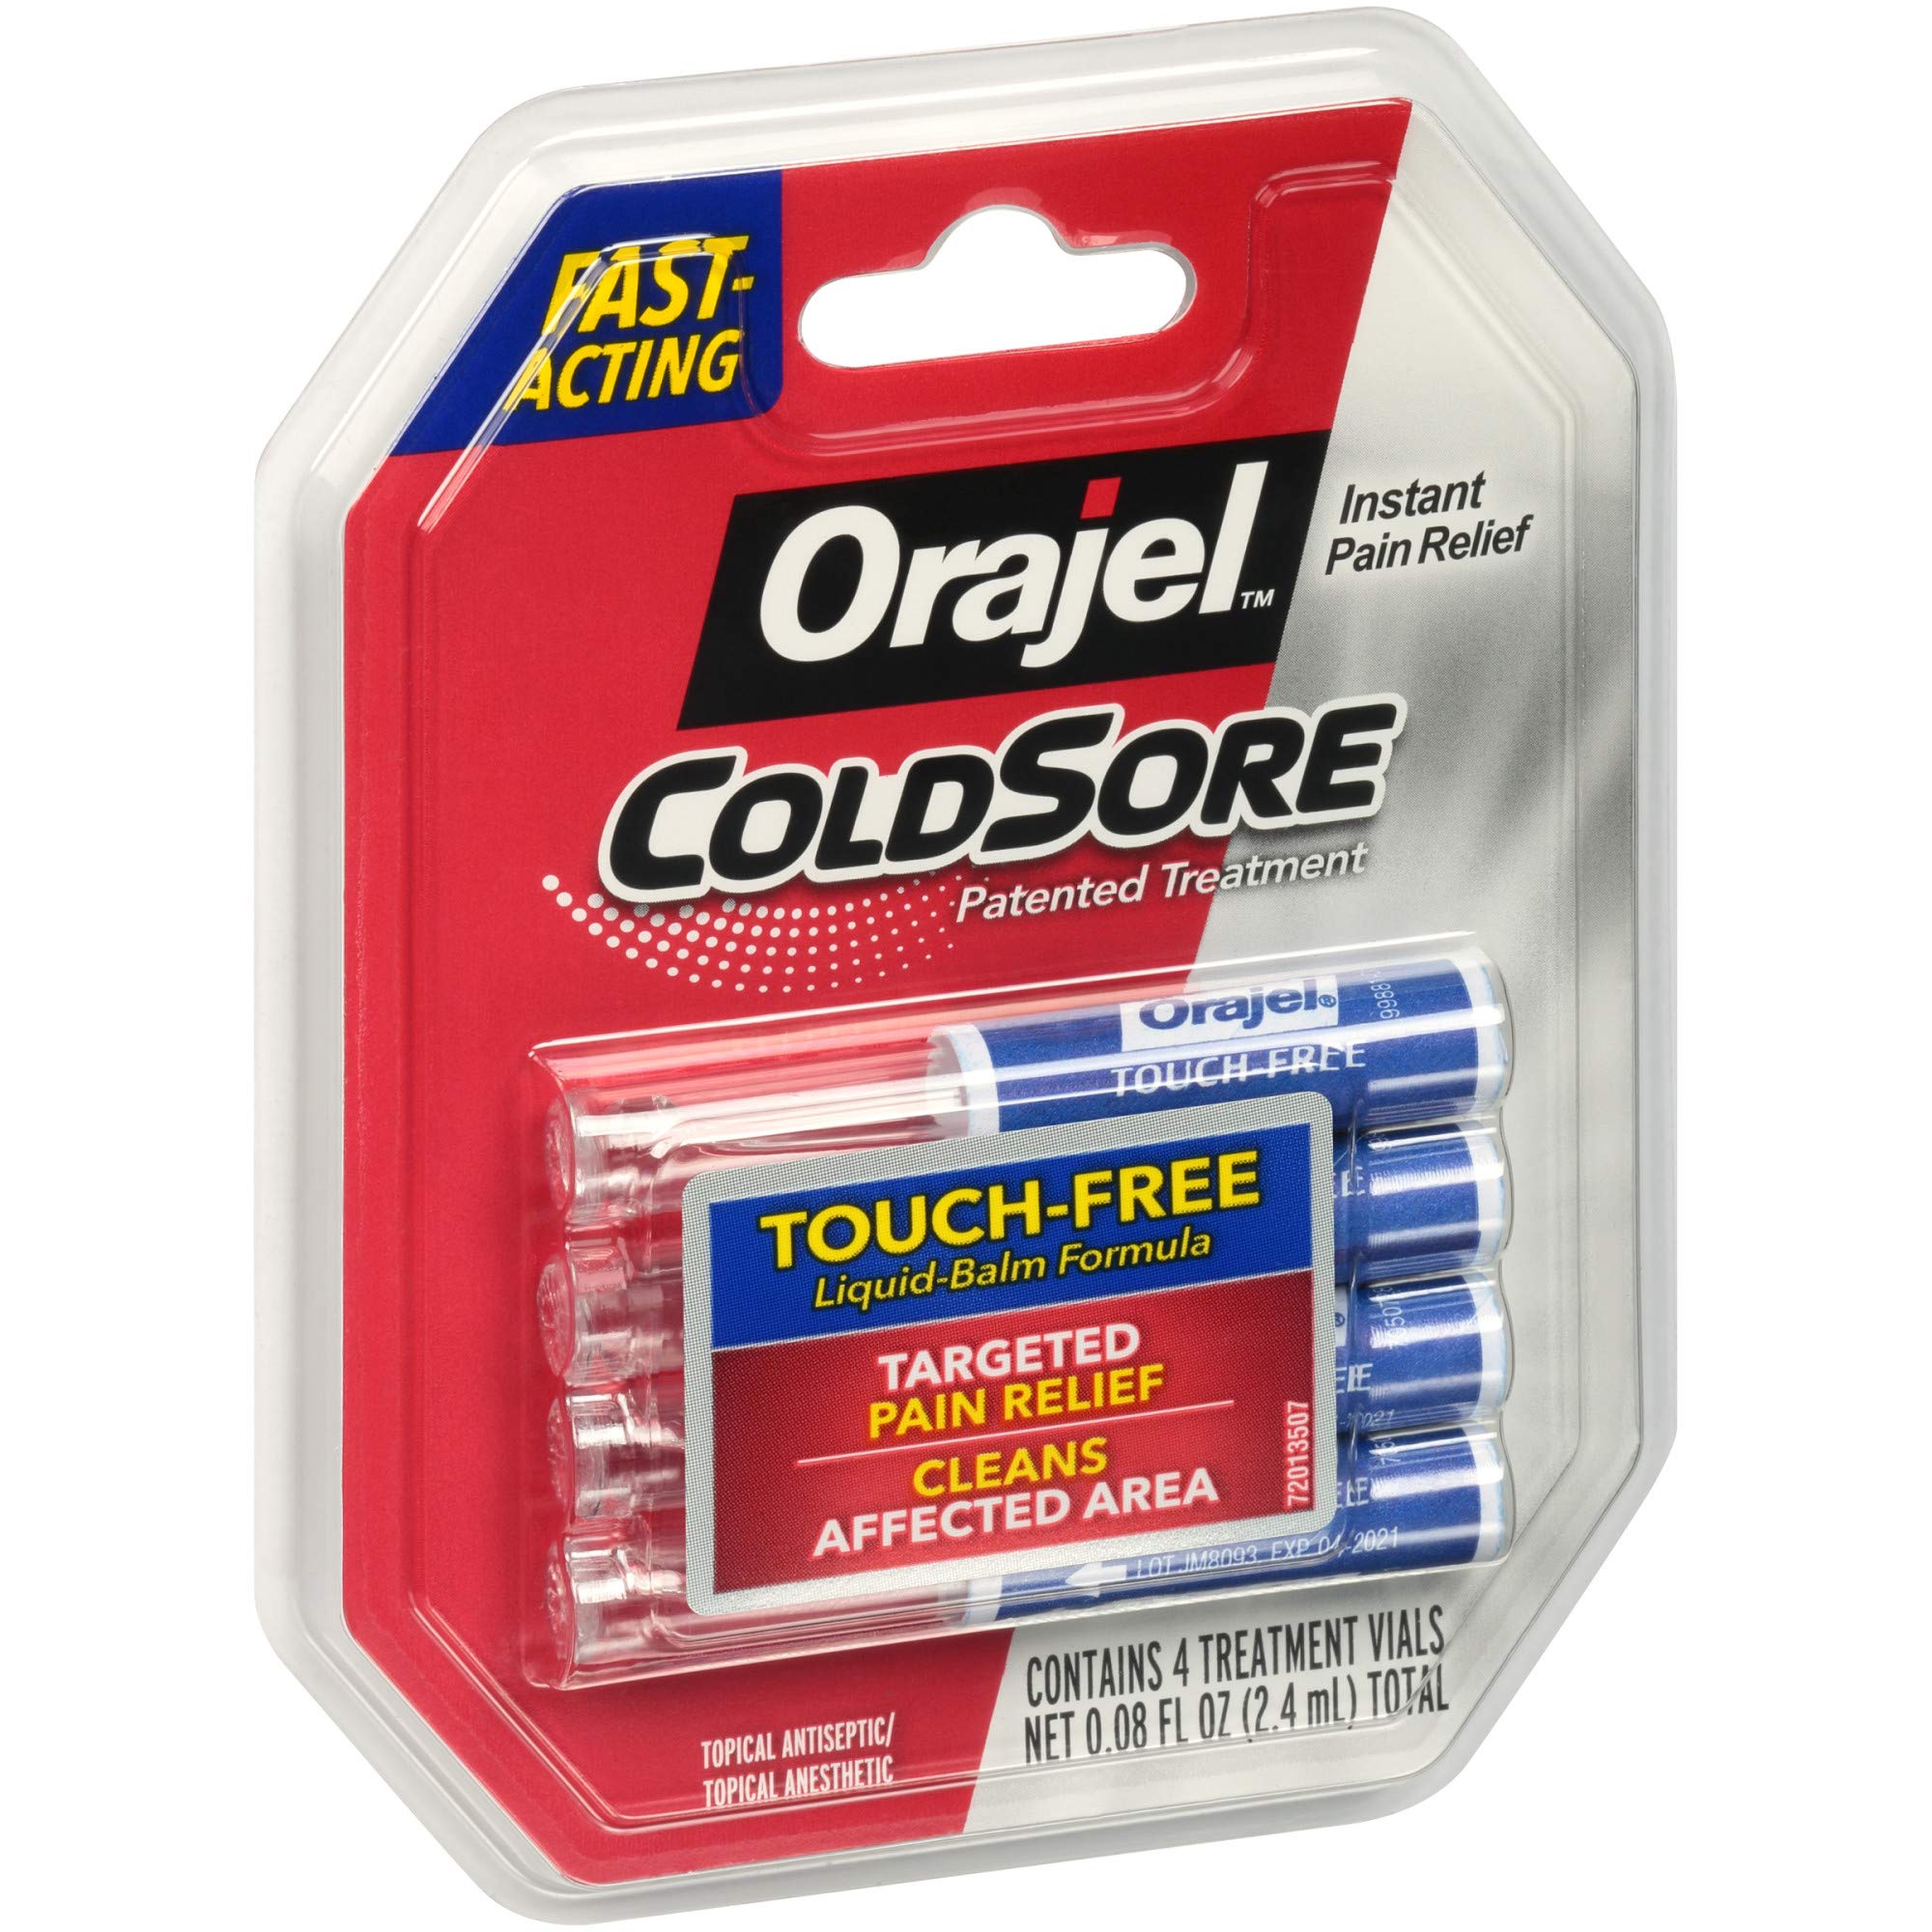 Orajel Cold Sore Treatment – Instant Relief for Cold Sore Pain- From #1 Oral Pain Relief Brand